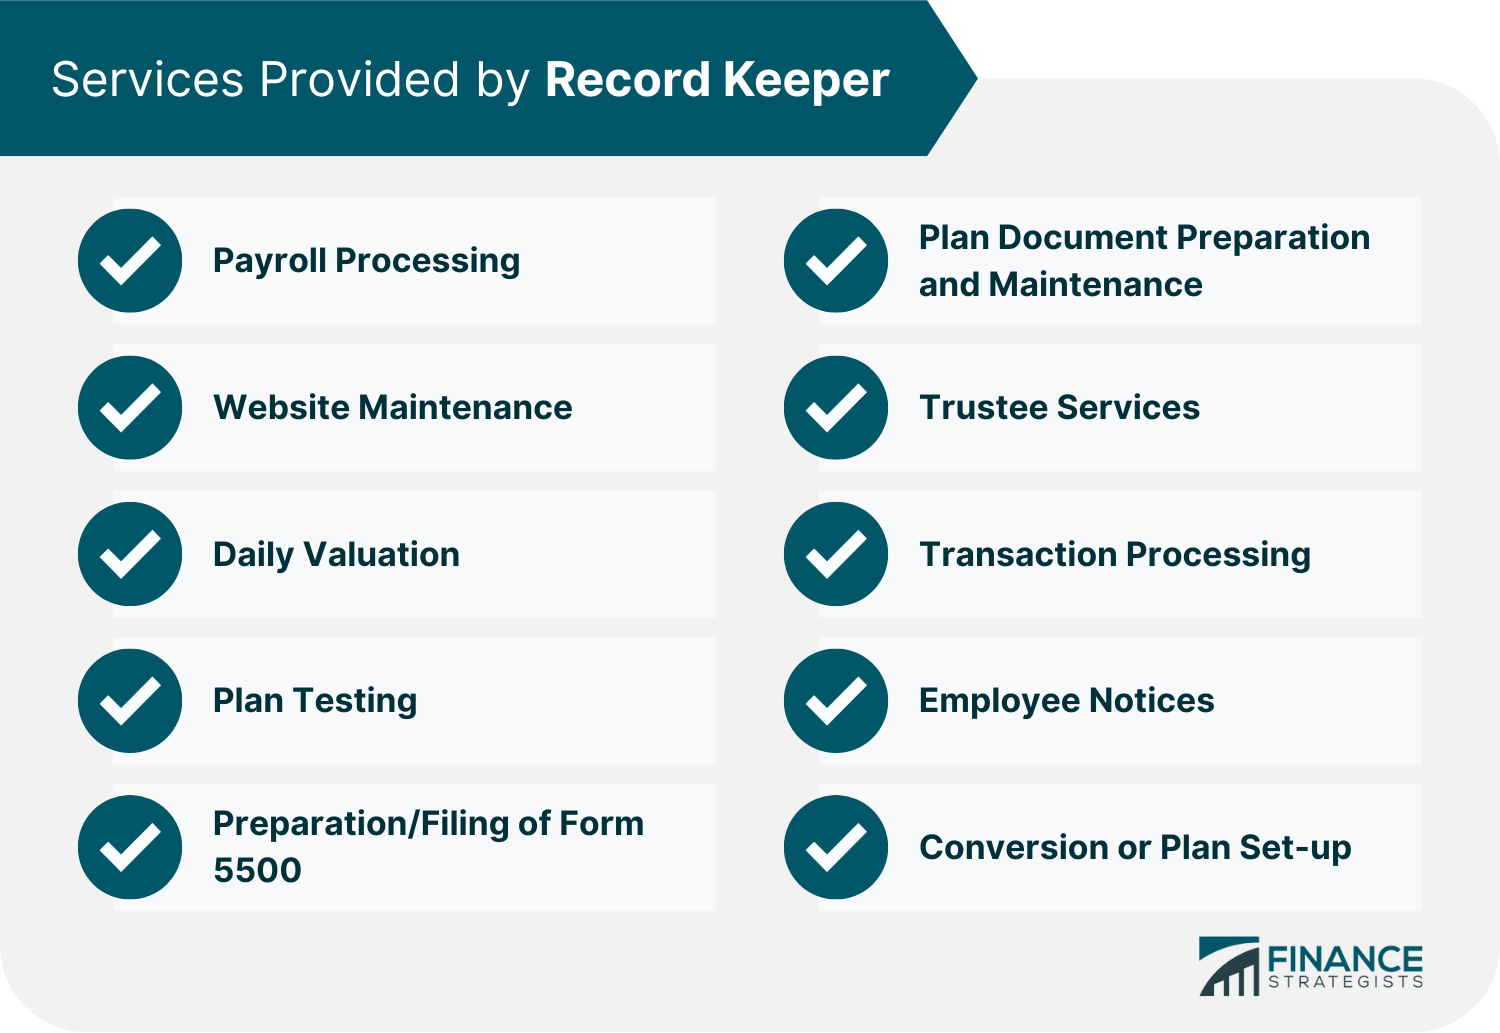 Services Provided by Record Keeper